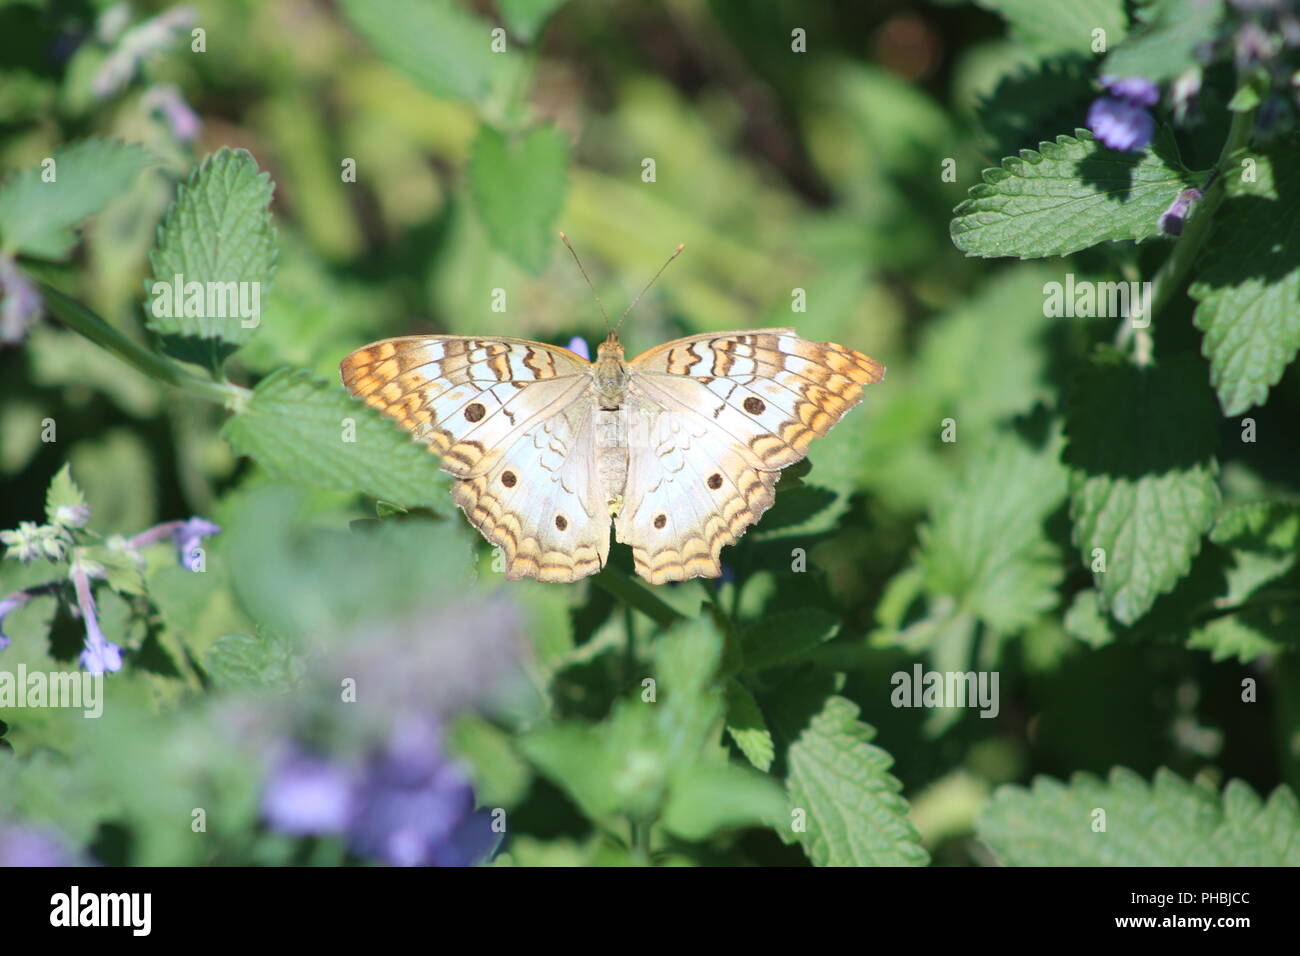 White Peacock Butterfly perched among leaves Stock Photo